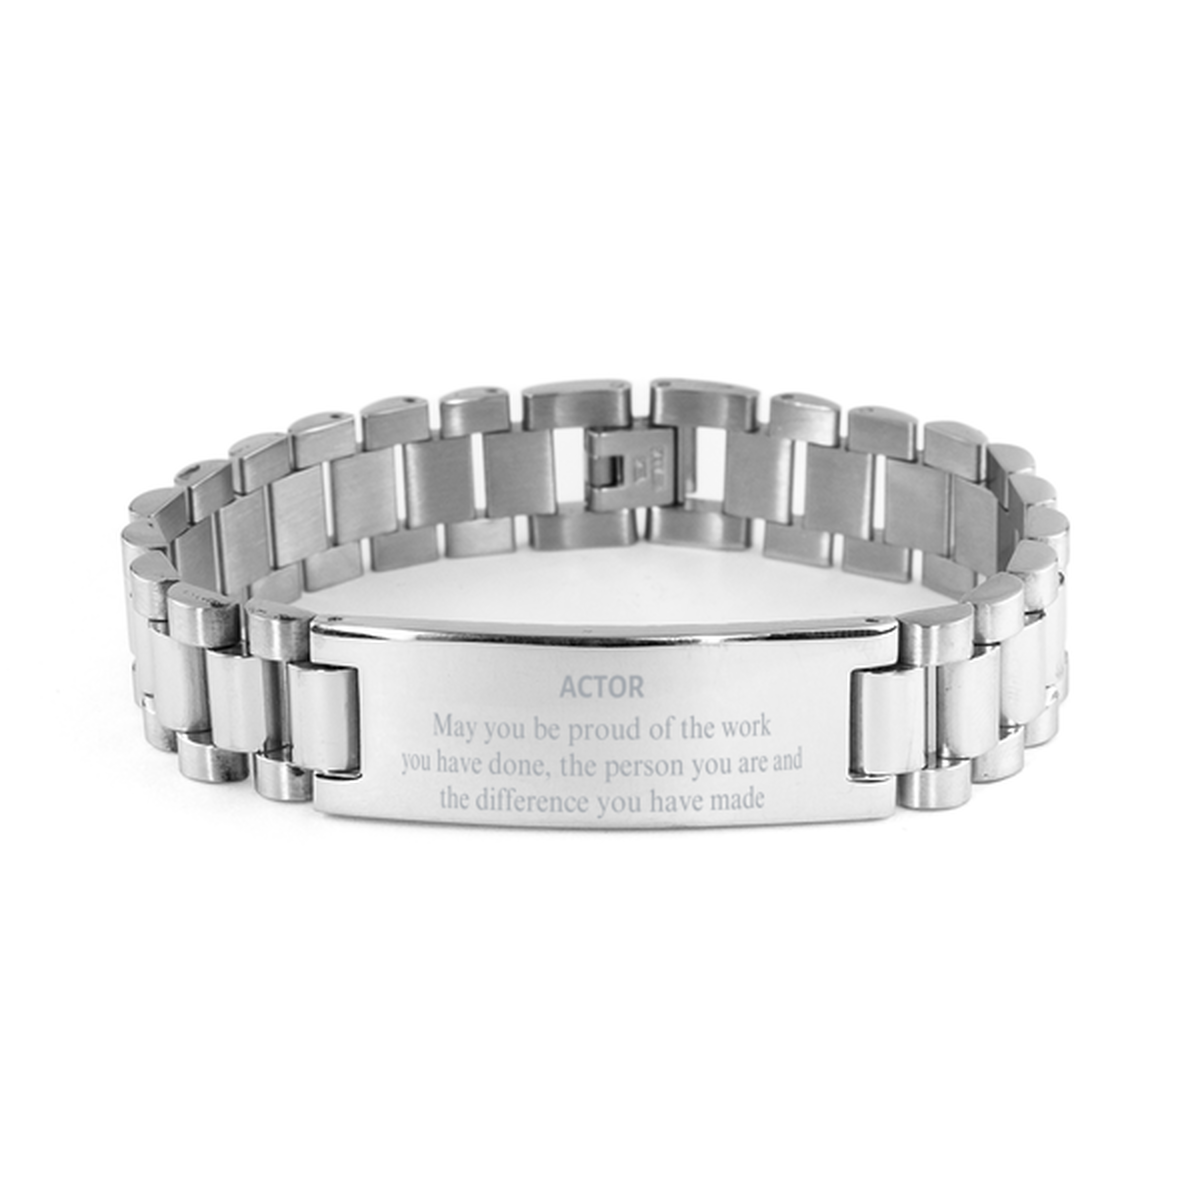 Actor May you be proud of the work you have done, Retirement Actor Ladder Stainless Steel Bracelet for Colleague Appreciation Gifts Amazing for Actor